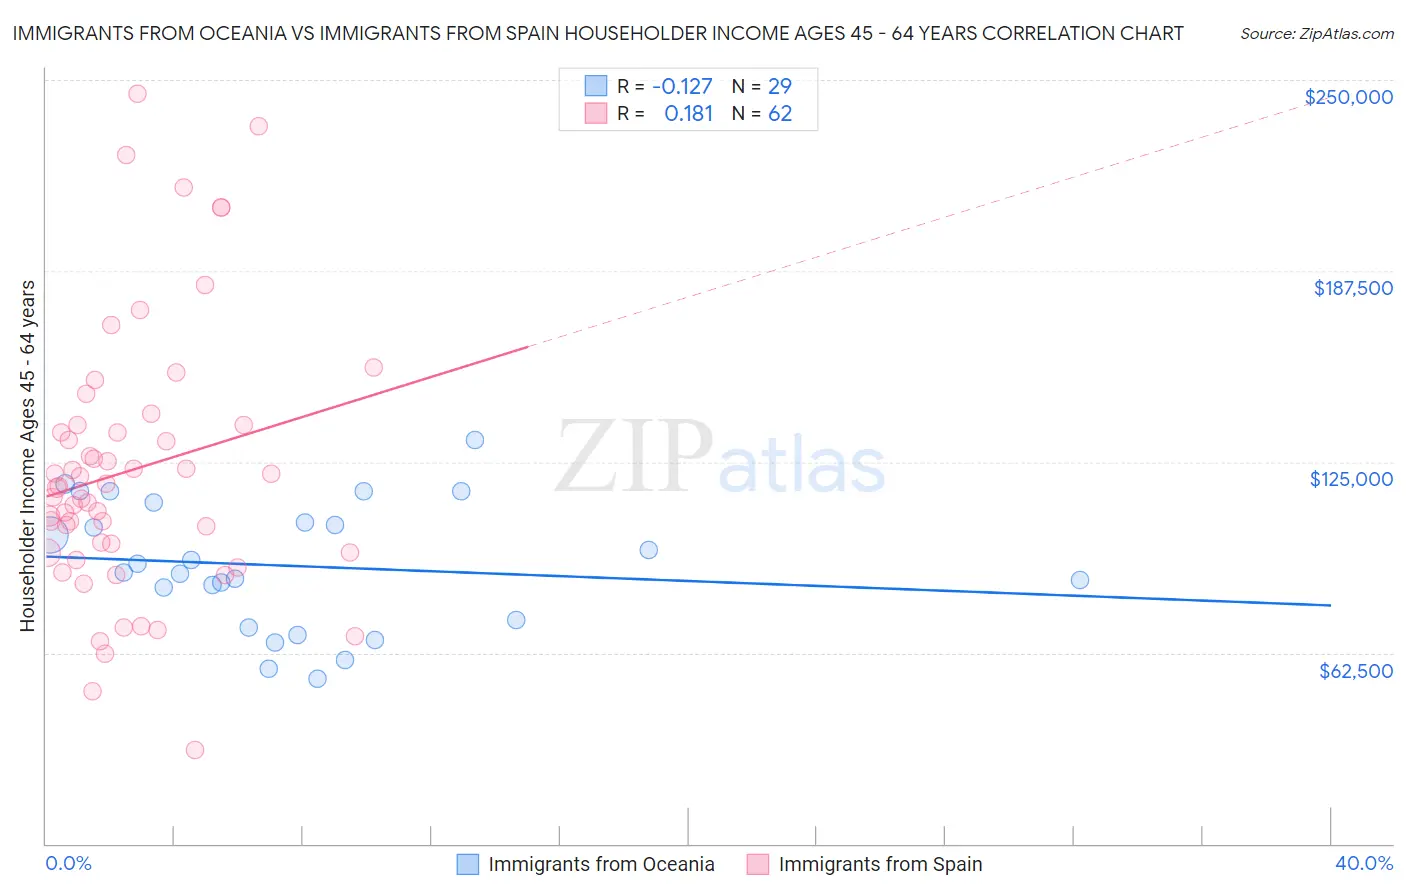 Immigrants from Oceania vs Immigrants from Spain Householder Income Ages 45 - 64 years